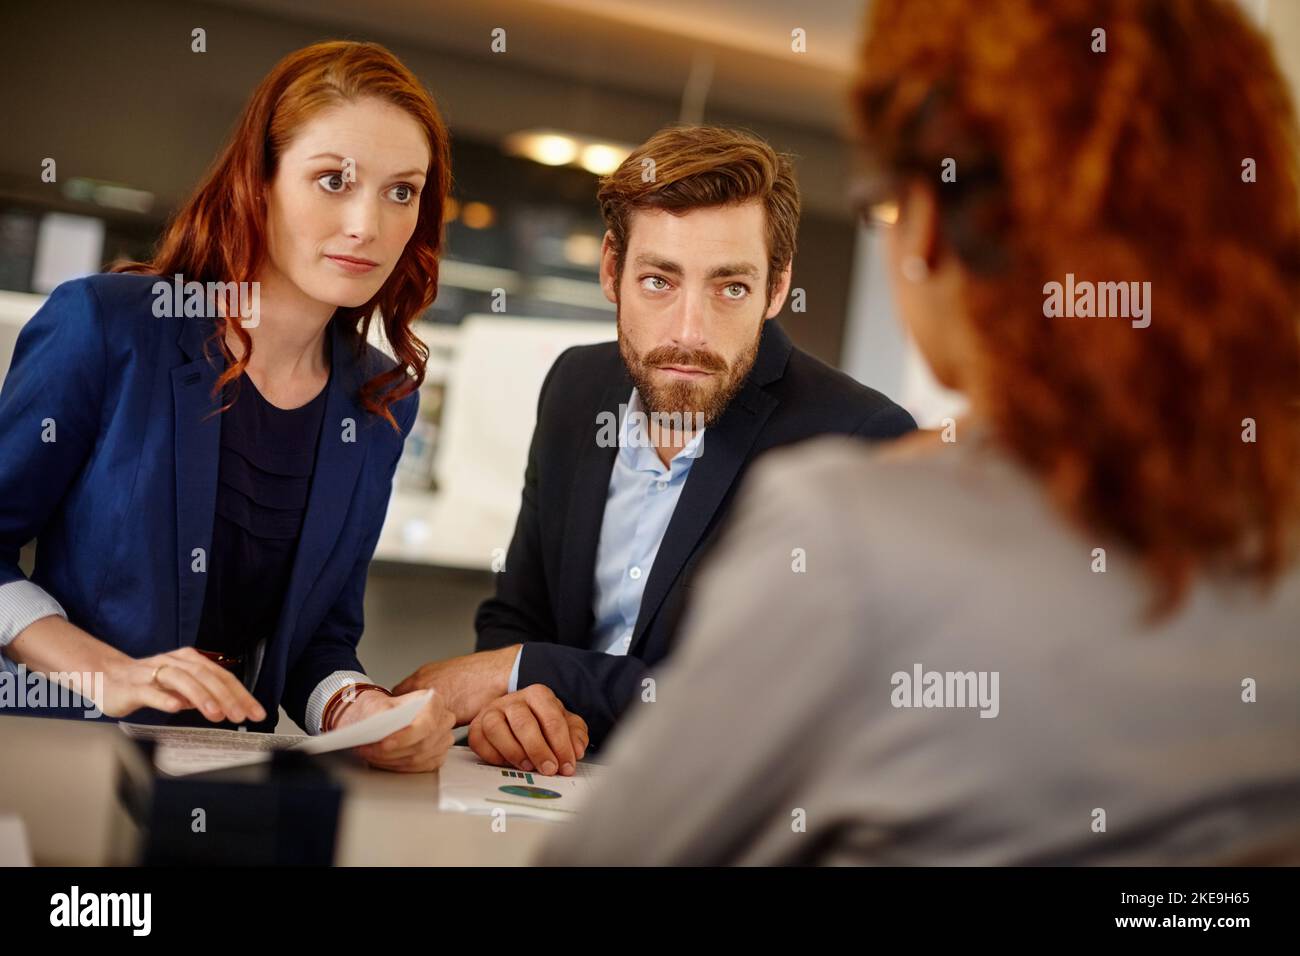 Tackling business head on. colleagues having a face to face meeting with a woman at work. Stock Photo